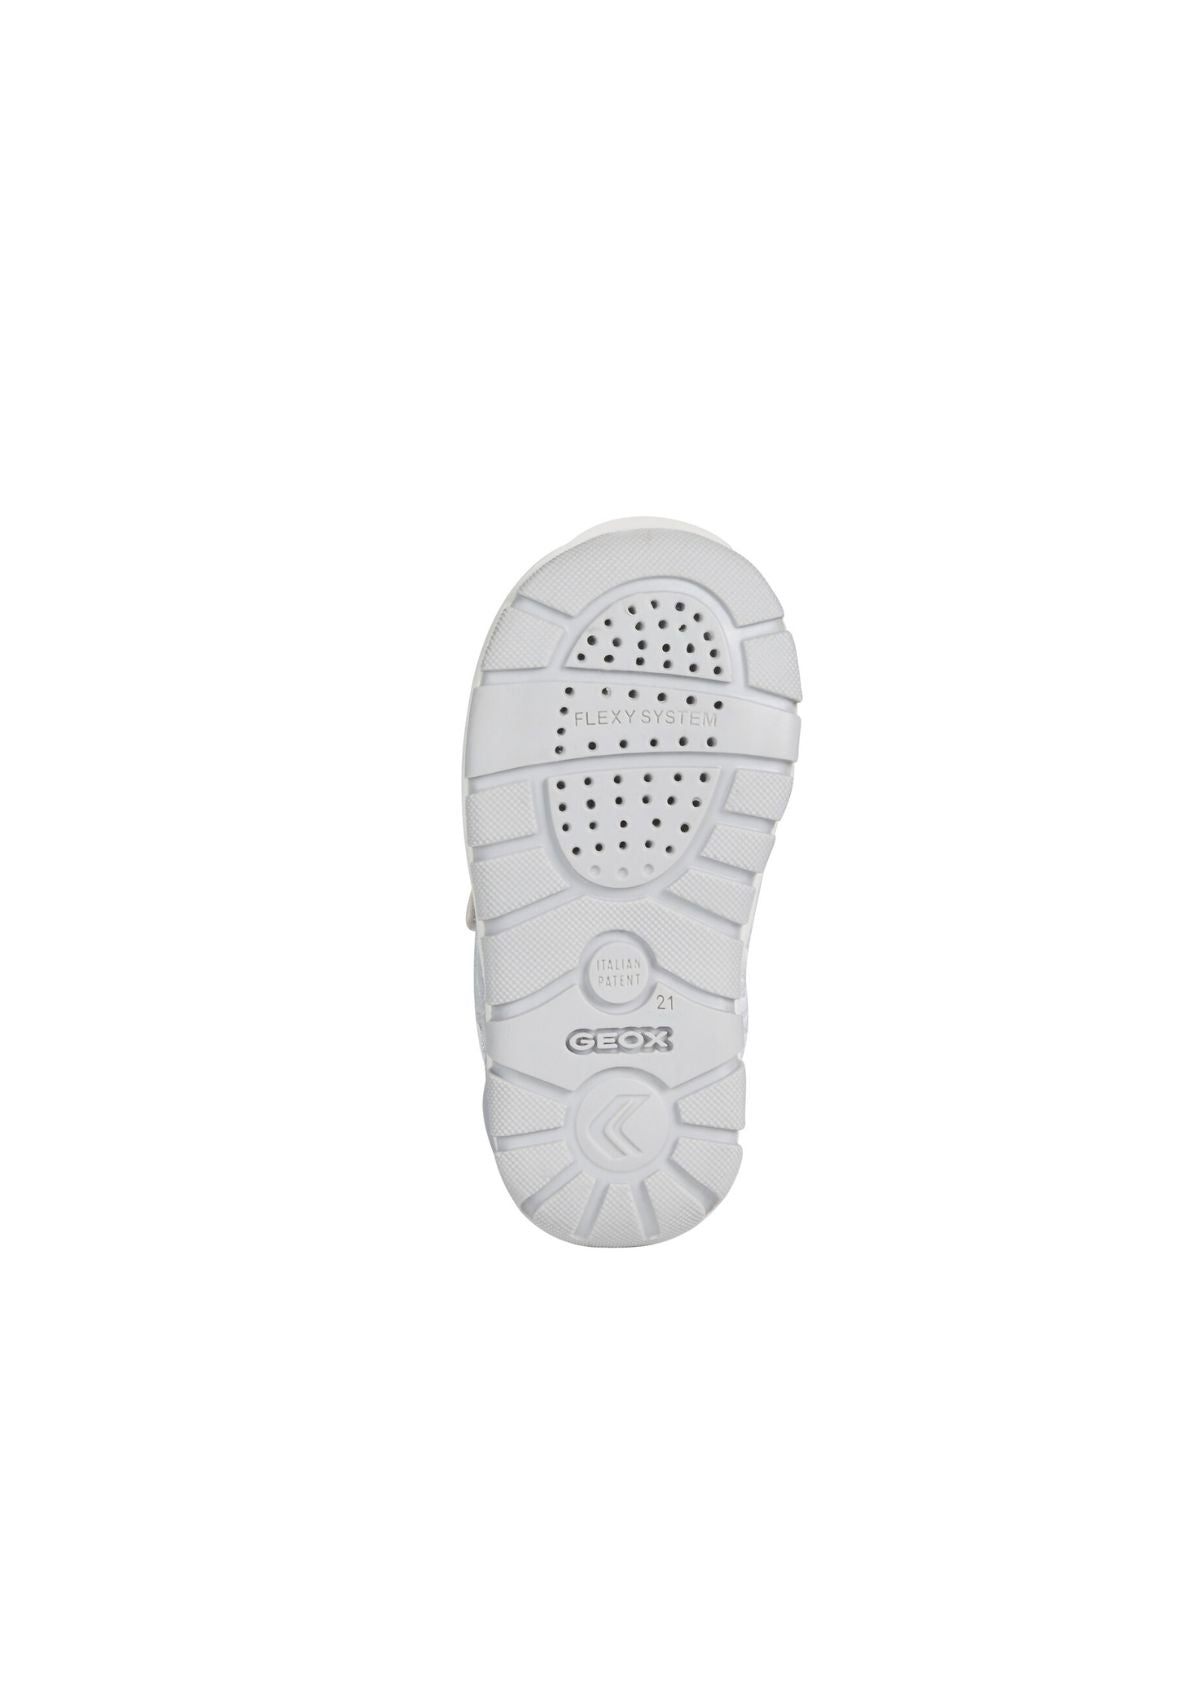 Geox Baby Girls Trainers SHAAX Silver sole